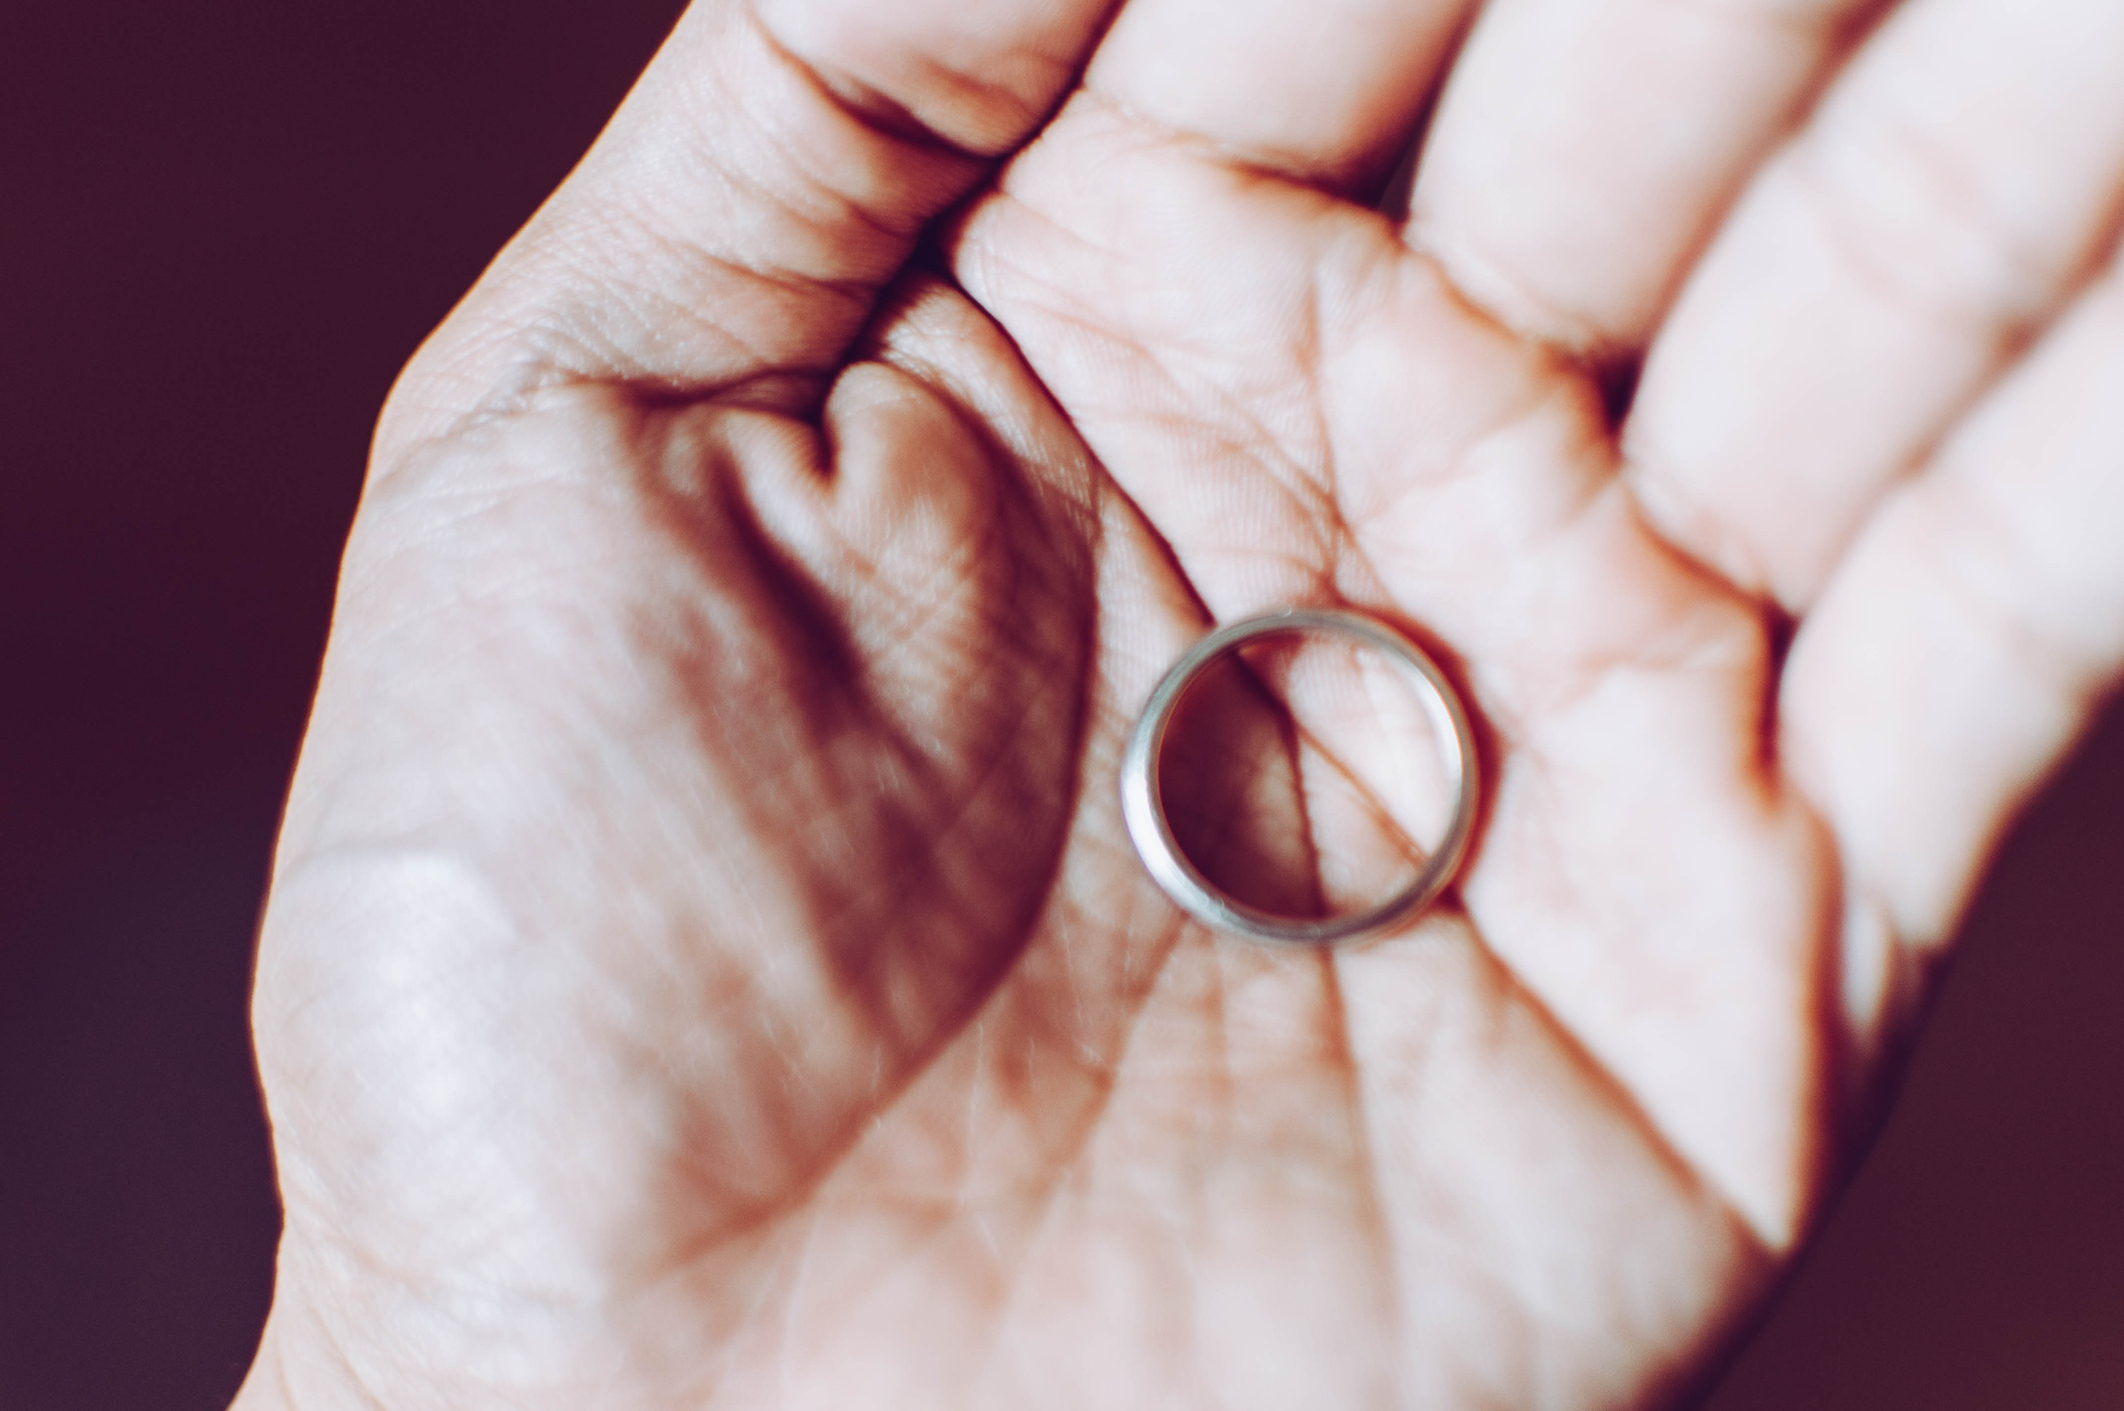 a hand holding a wedding band